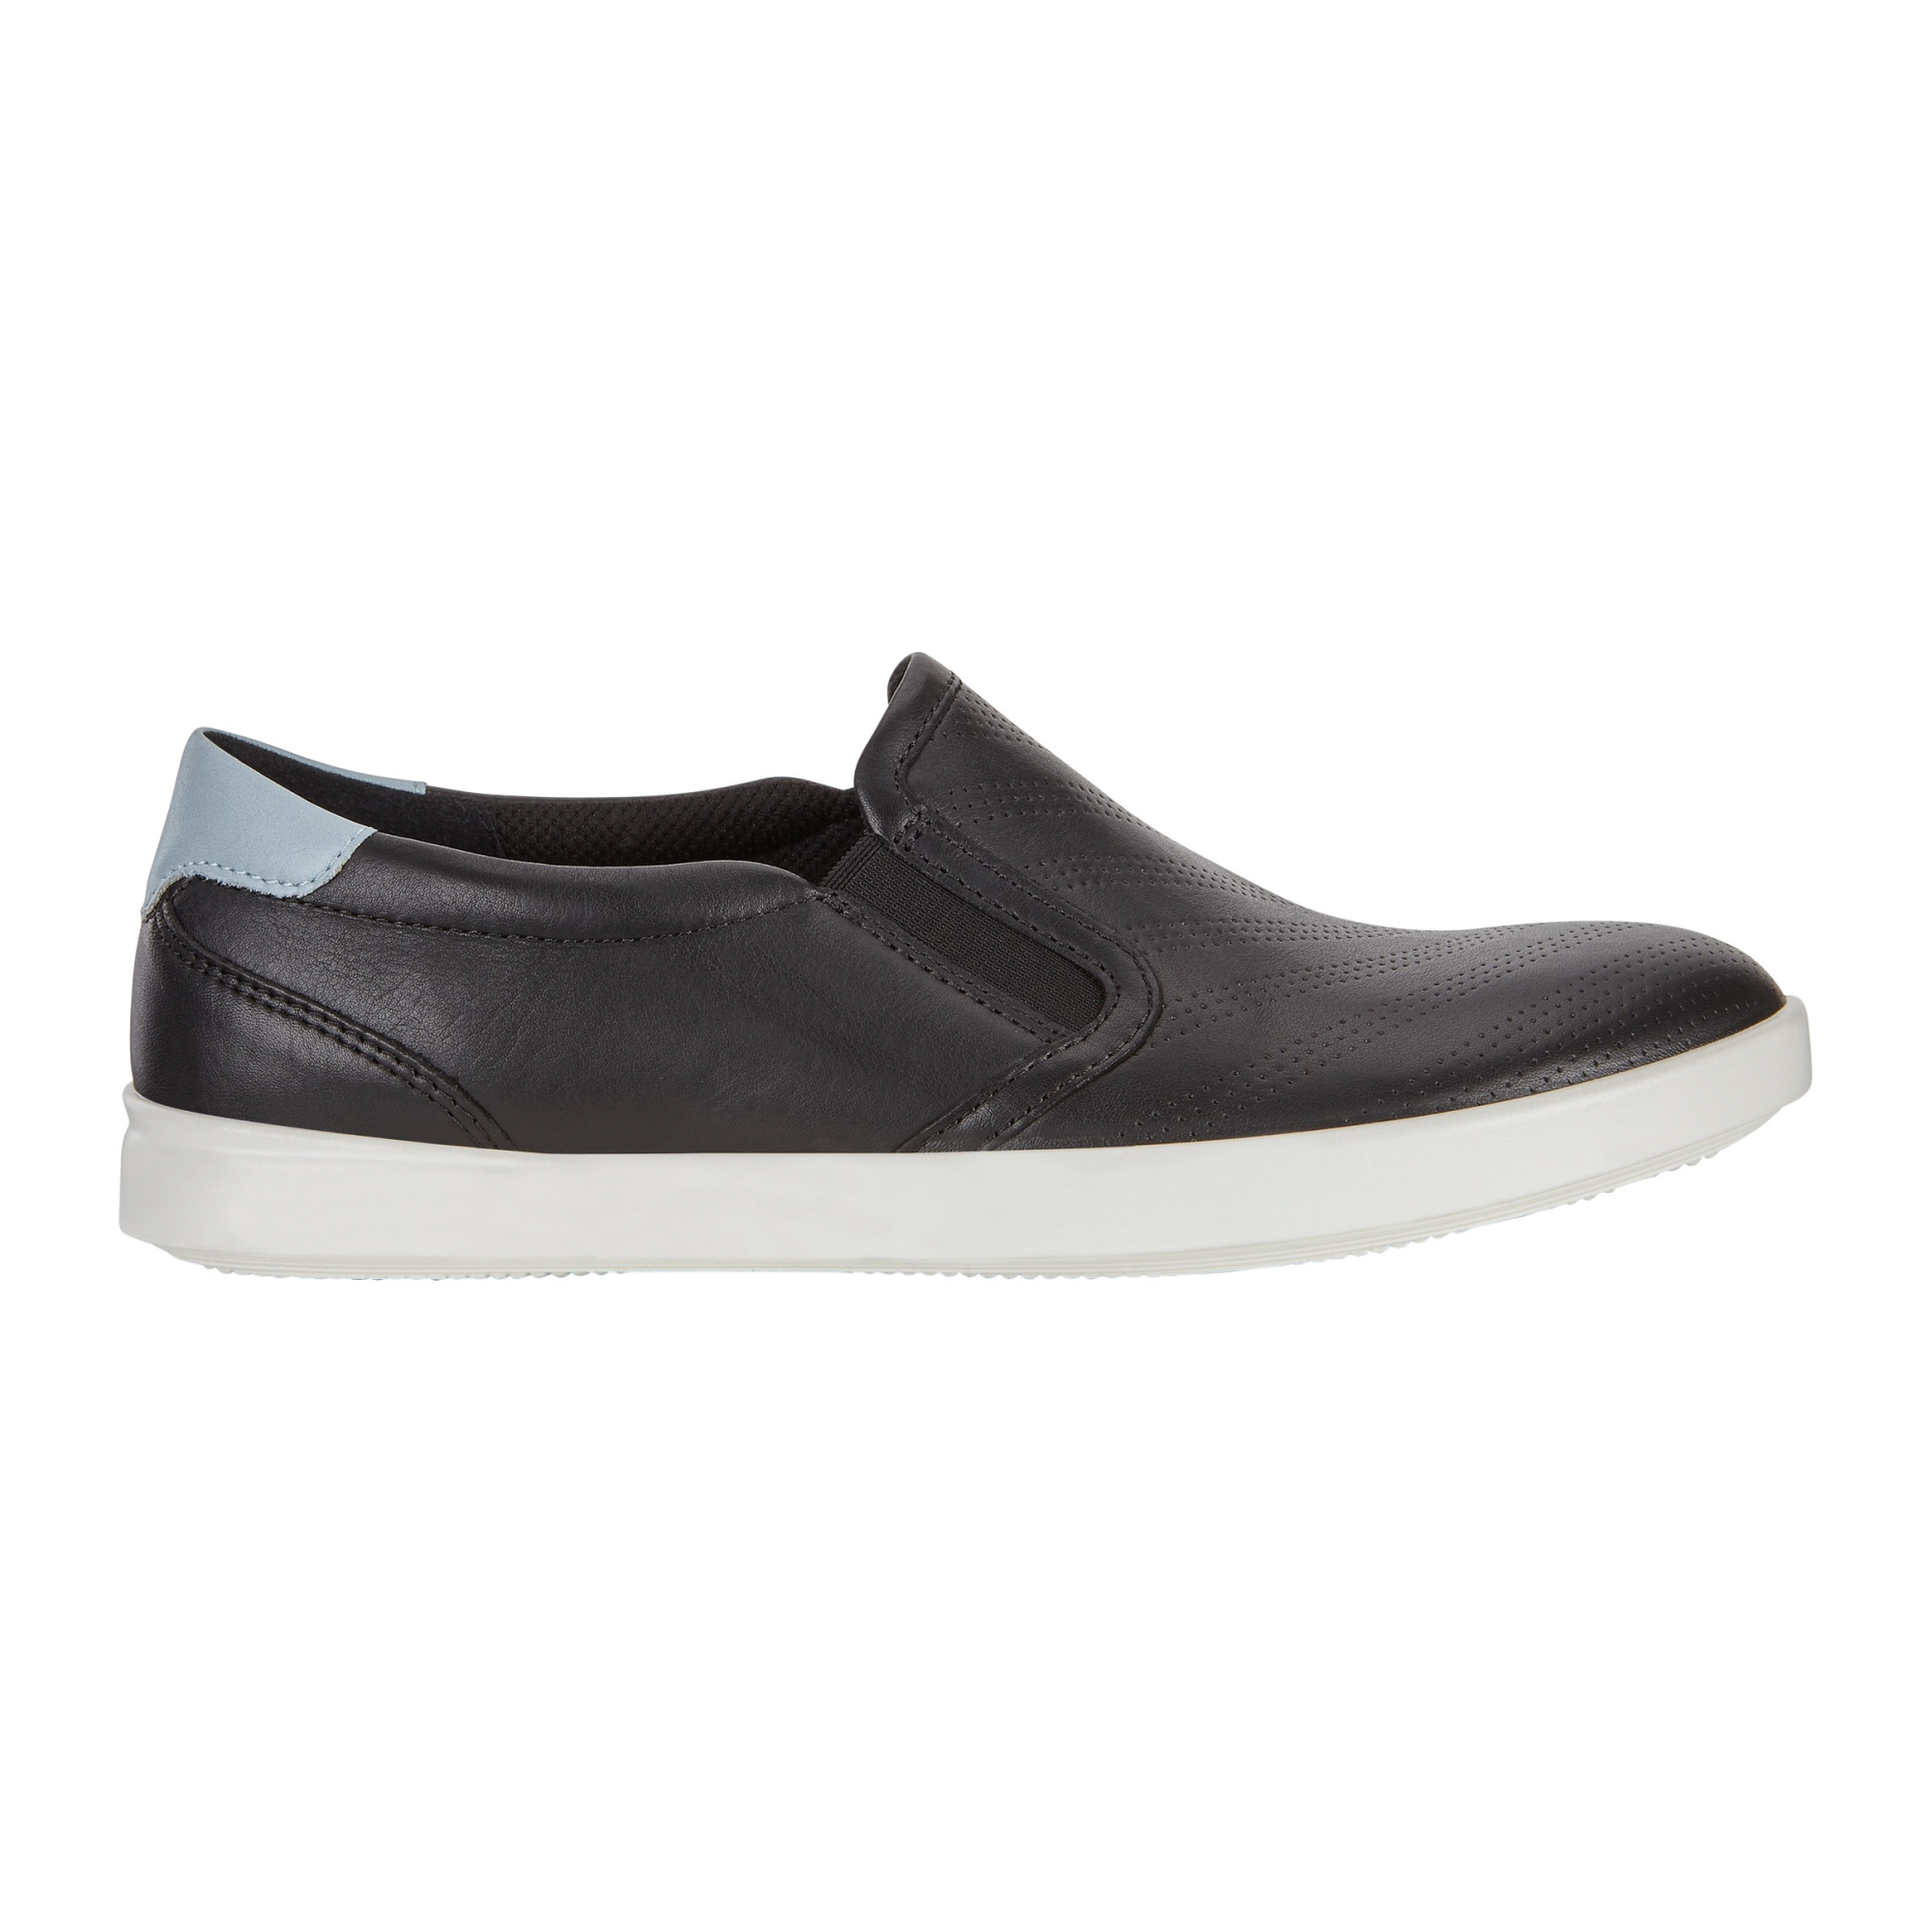 Aimee Sport Slip On 35 - Products - Mall - Veryk many product, quick response, safe your money!